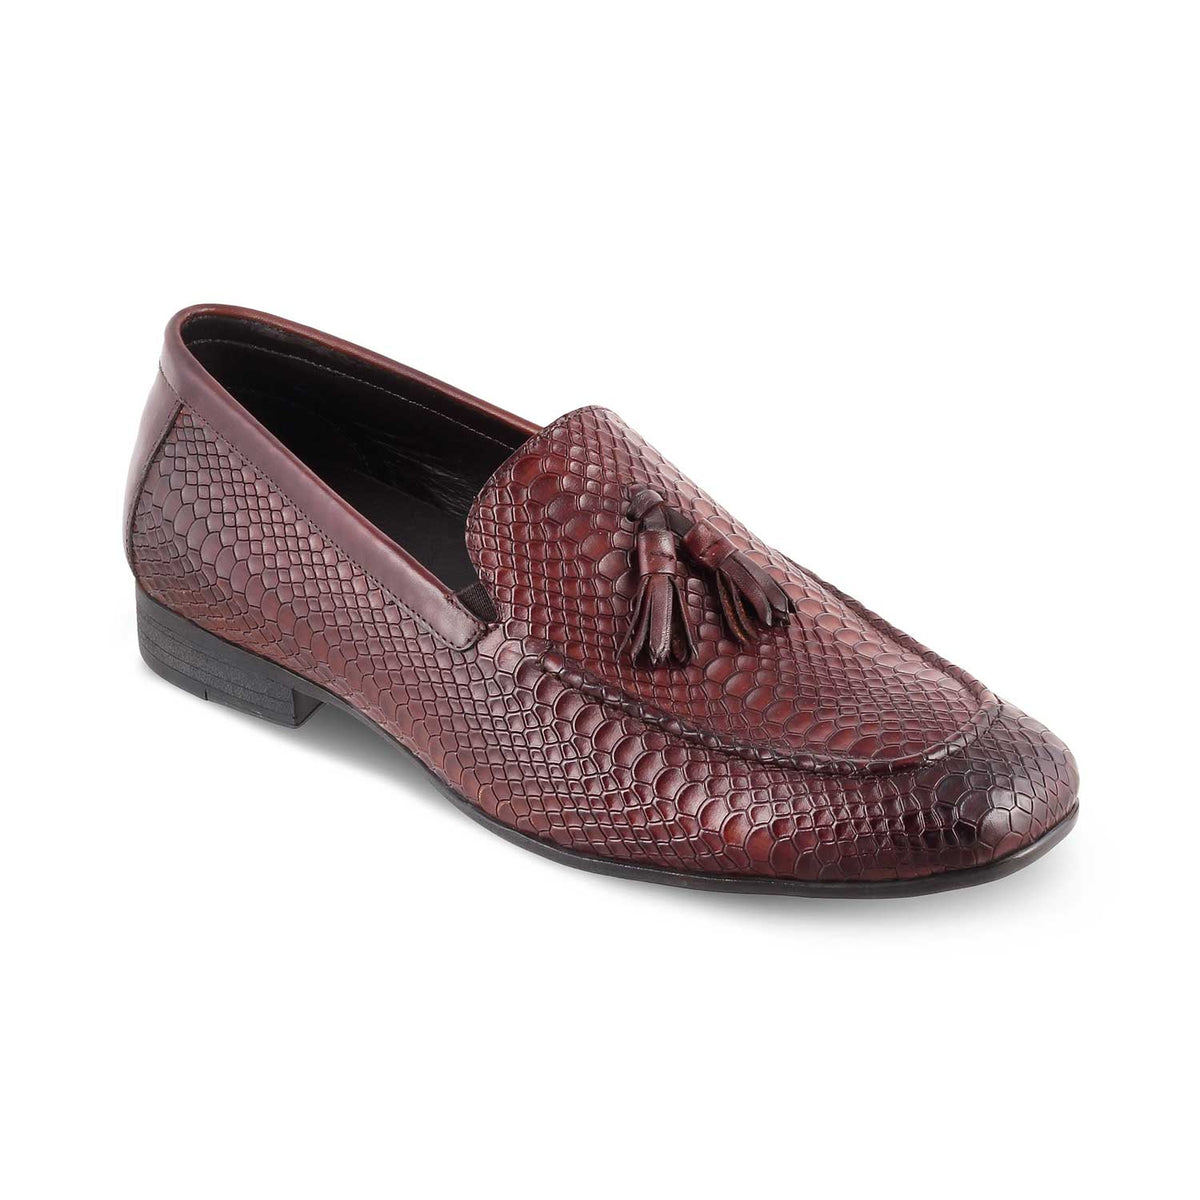 Tresmode-The Cytas Brown Men's Leather Tassel Loafers Tresmode-Tresmode